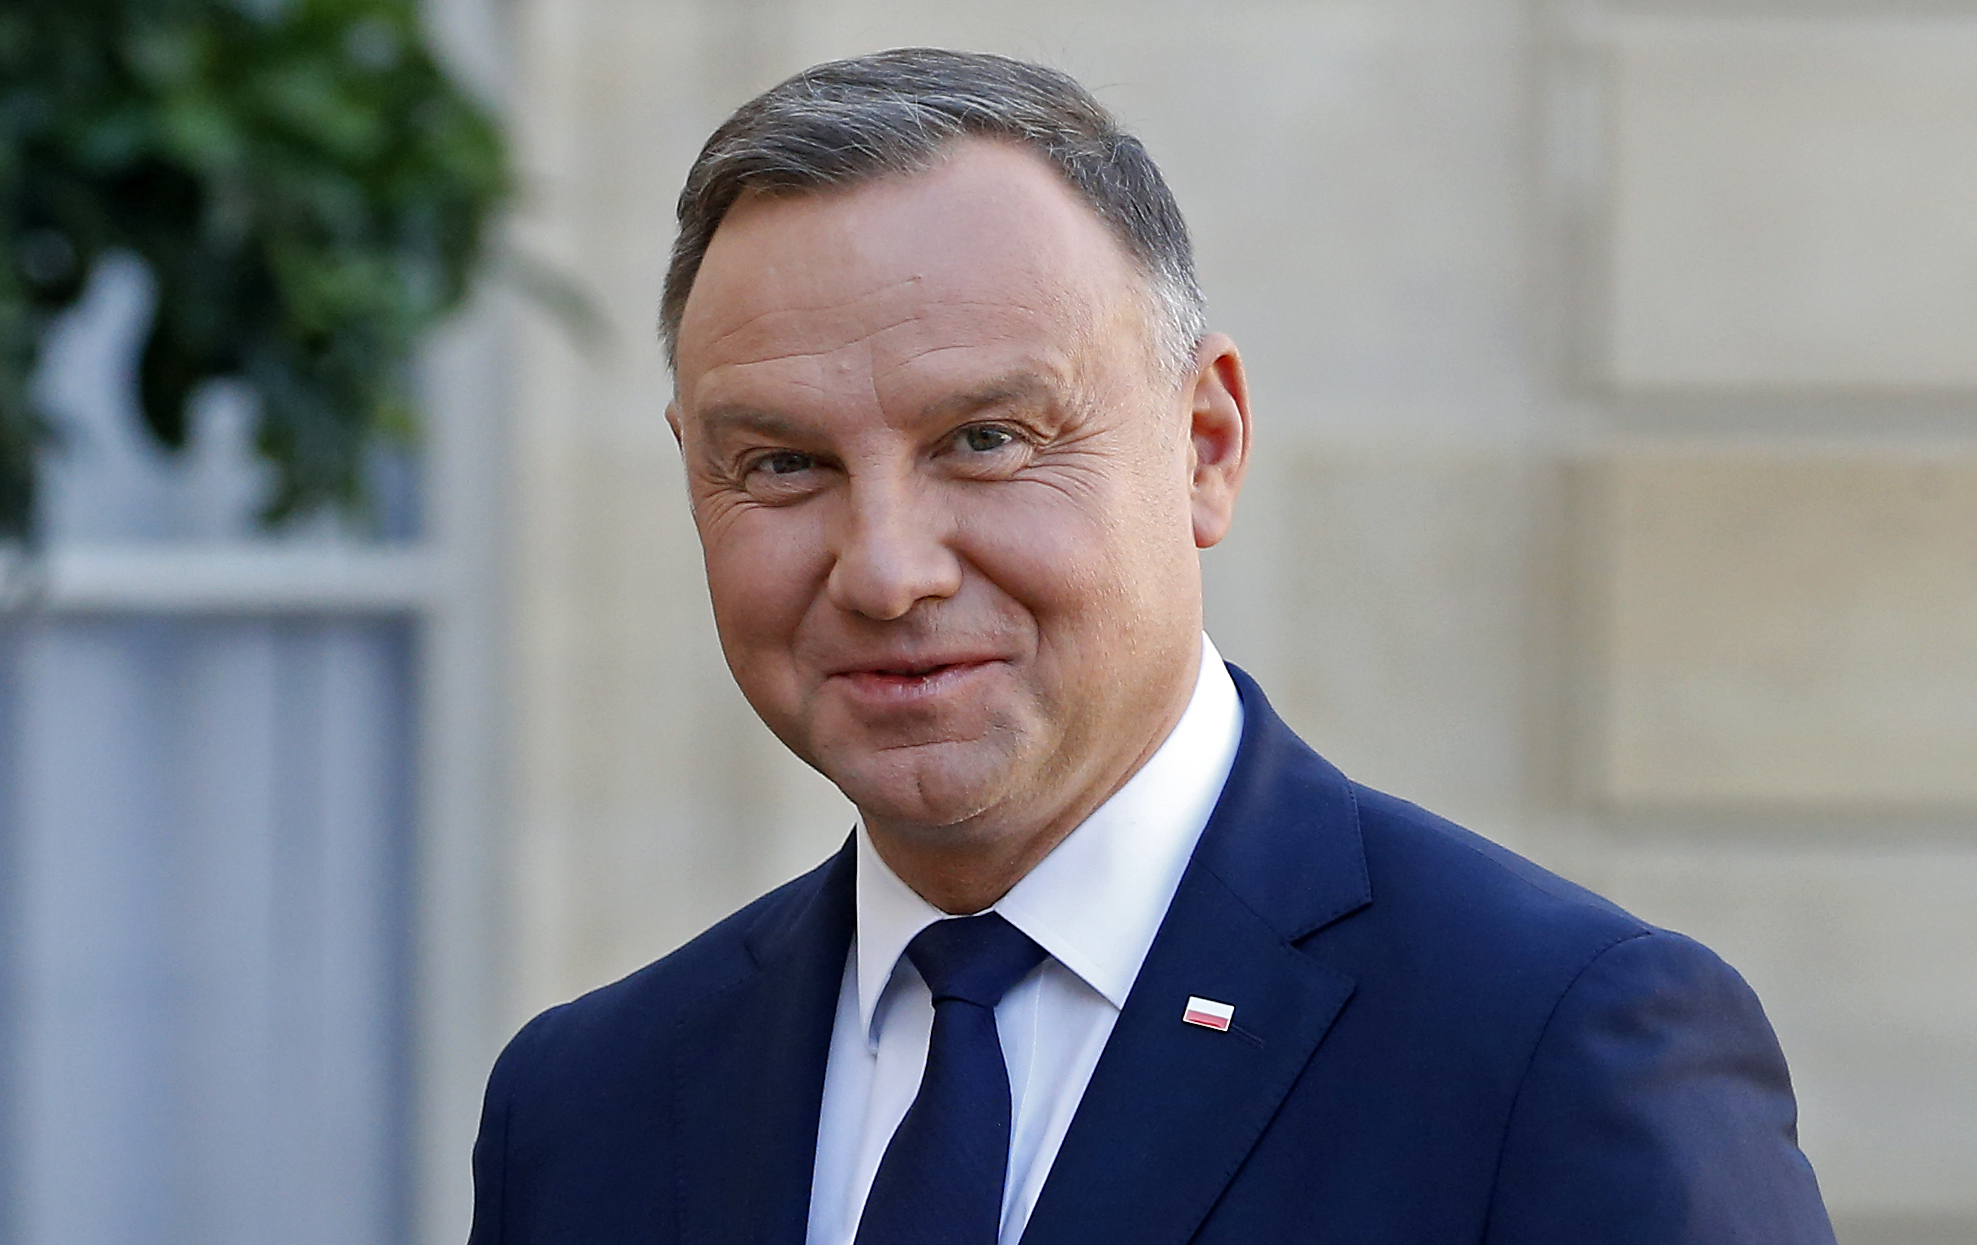 Andrzej Duda poses as he arrives for a working lunch with French President Emmanuel Macron in Paris on October 27, 2021.